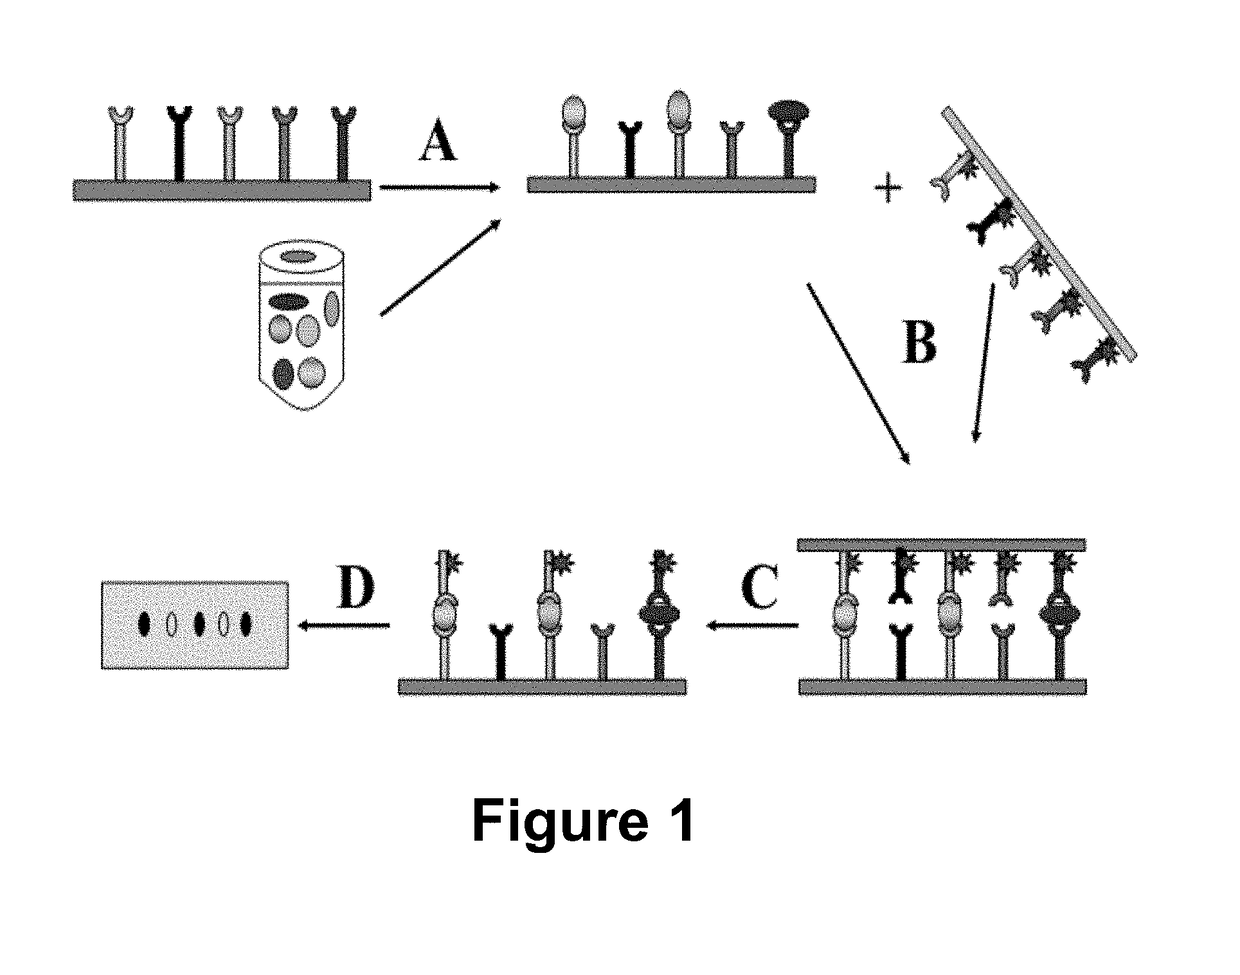 Method for high-throughput protein detection with two antibody microarrays